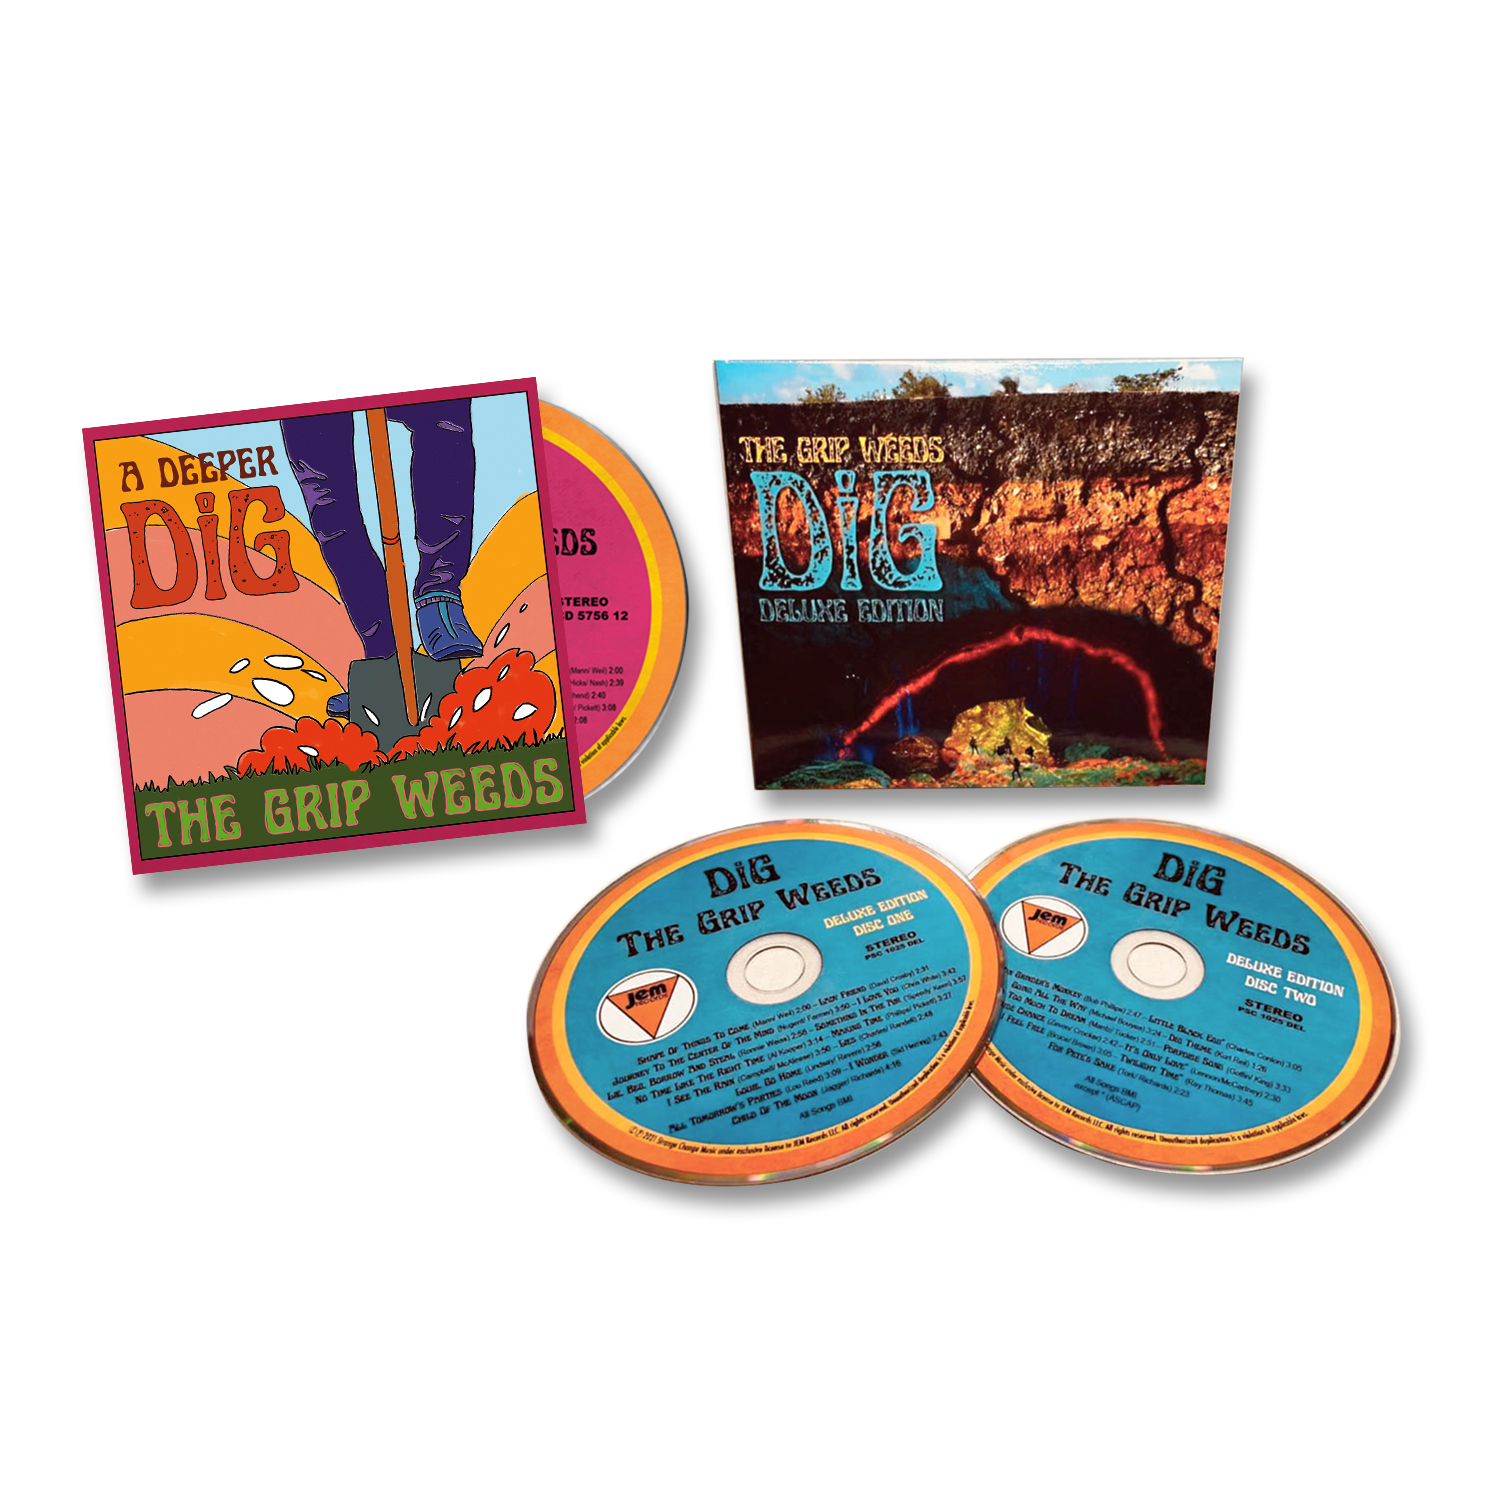 DiG Super Deluxe Edition